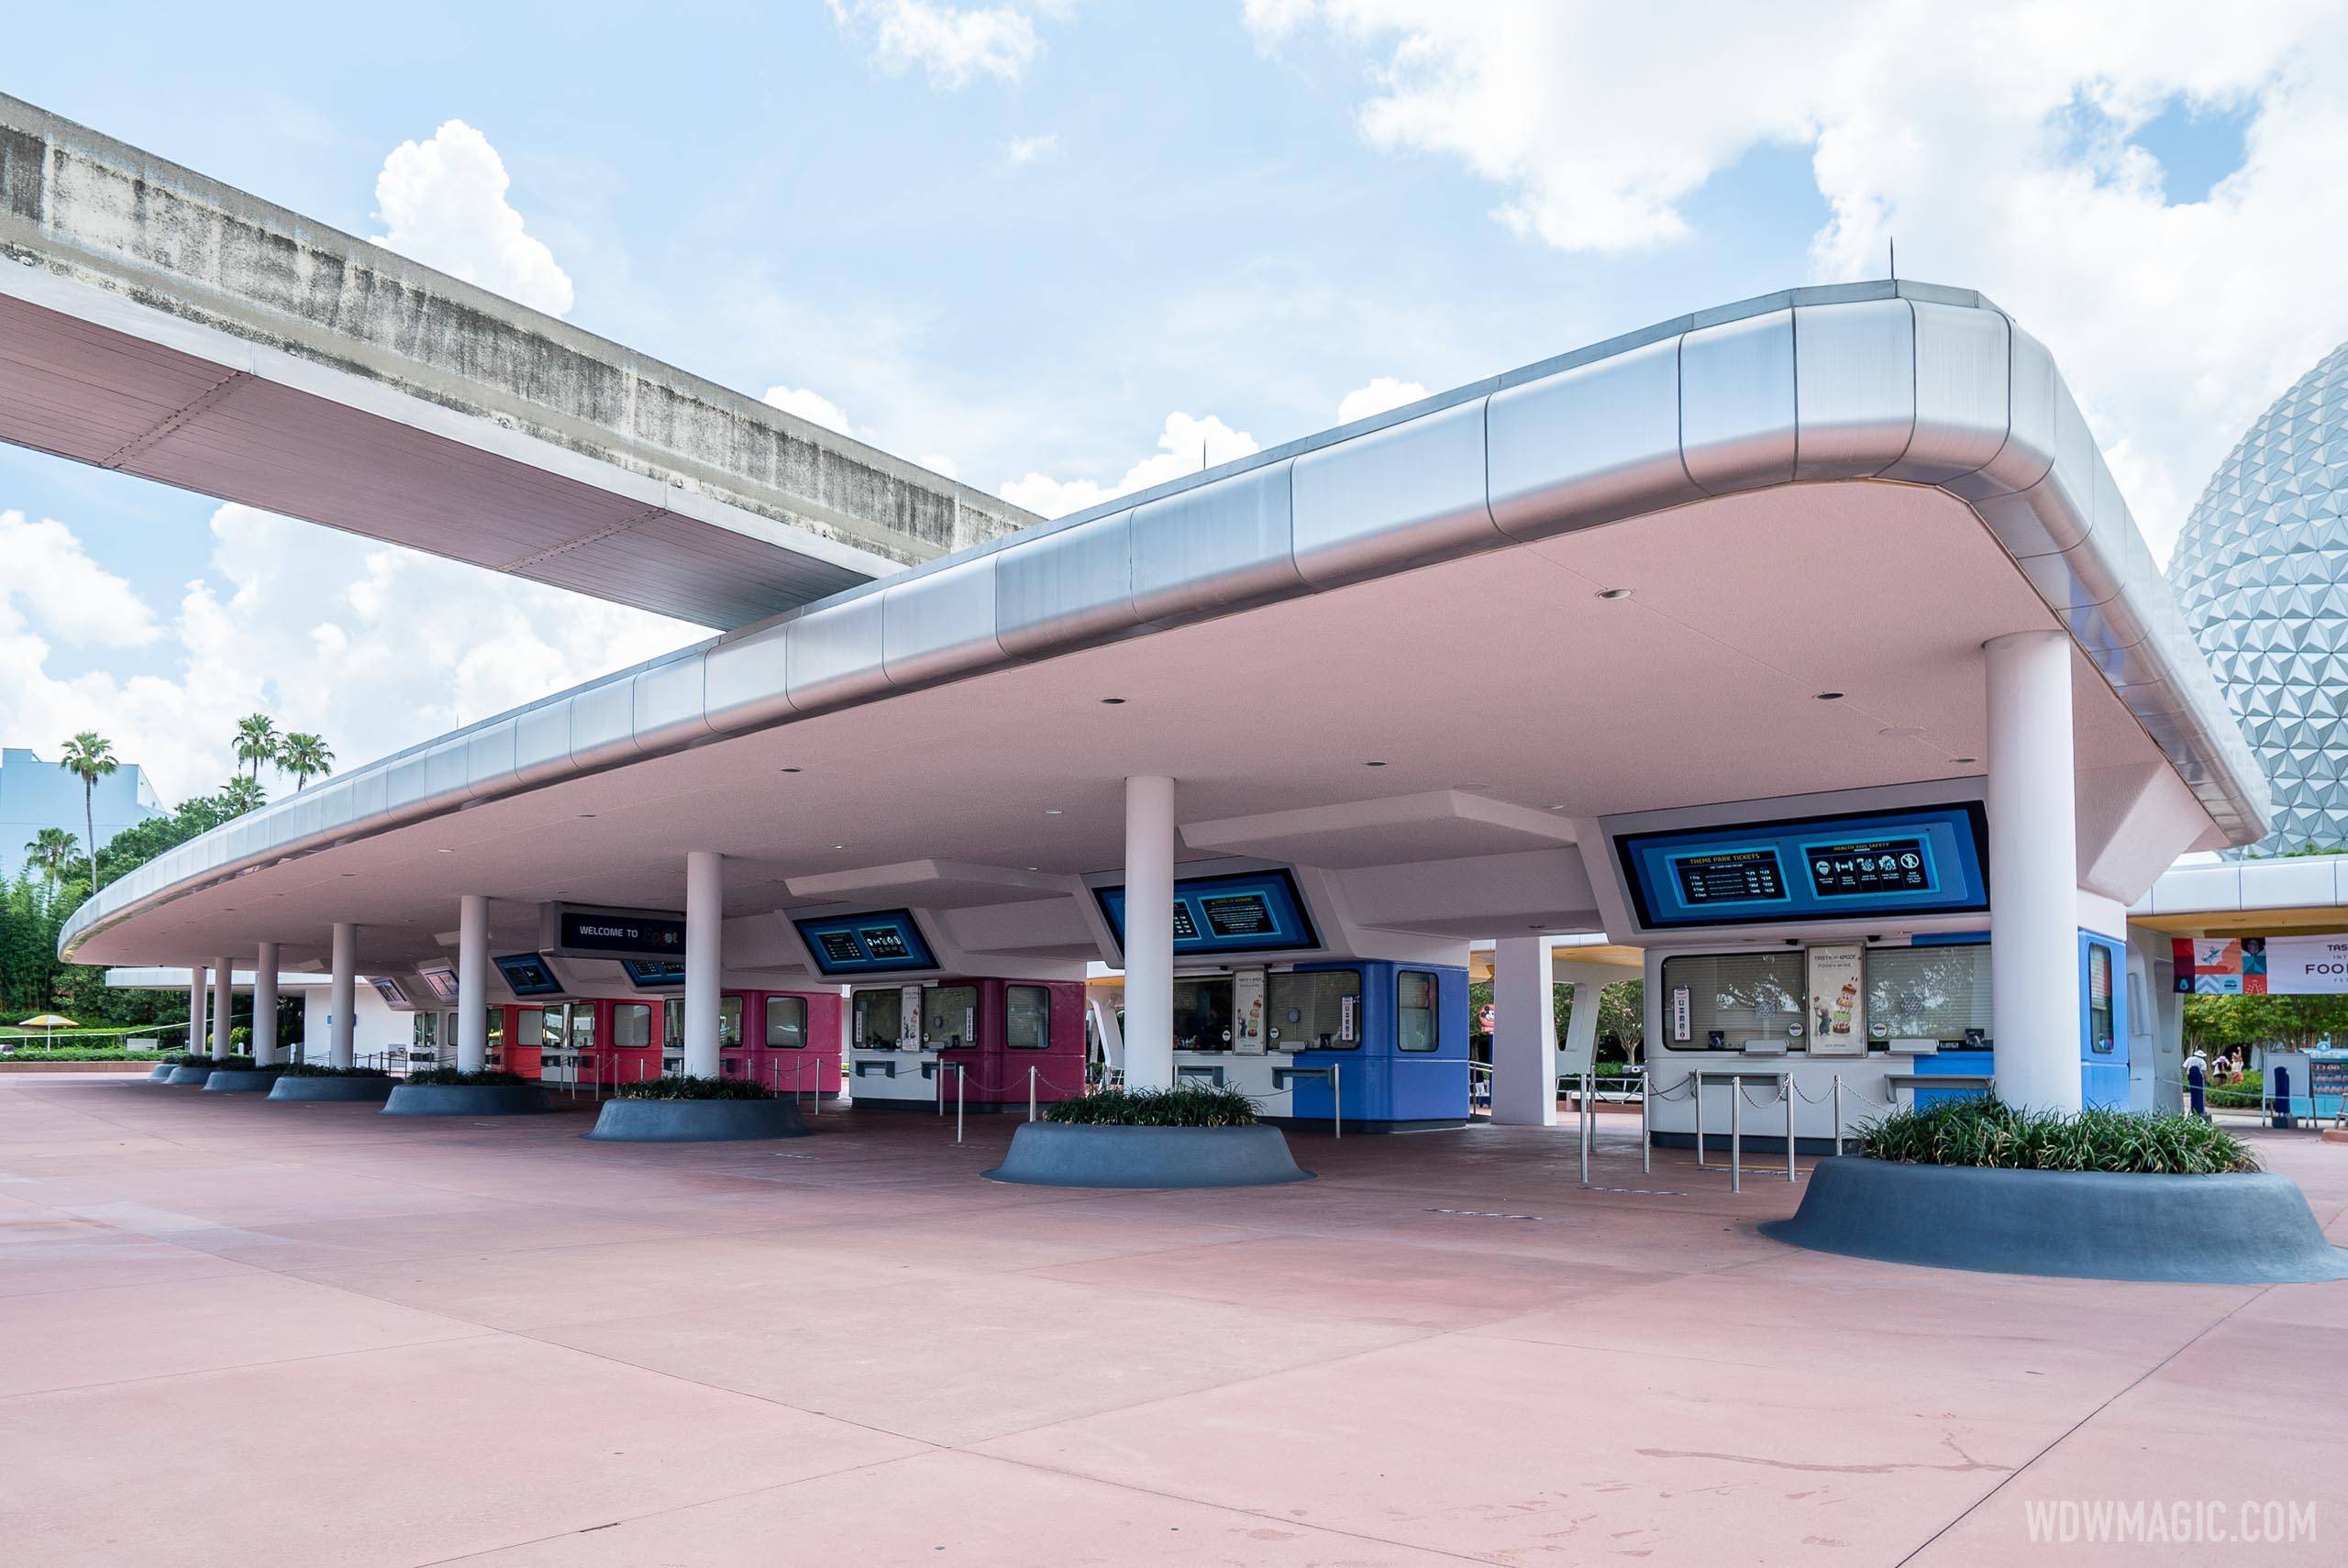 EPCOT new color ticket booths